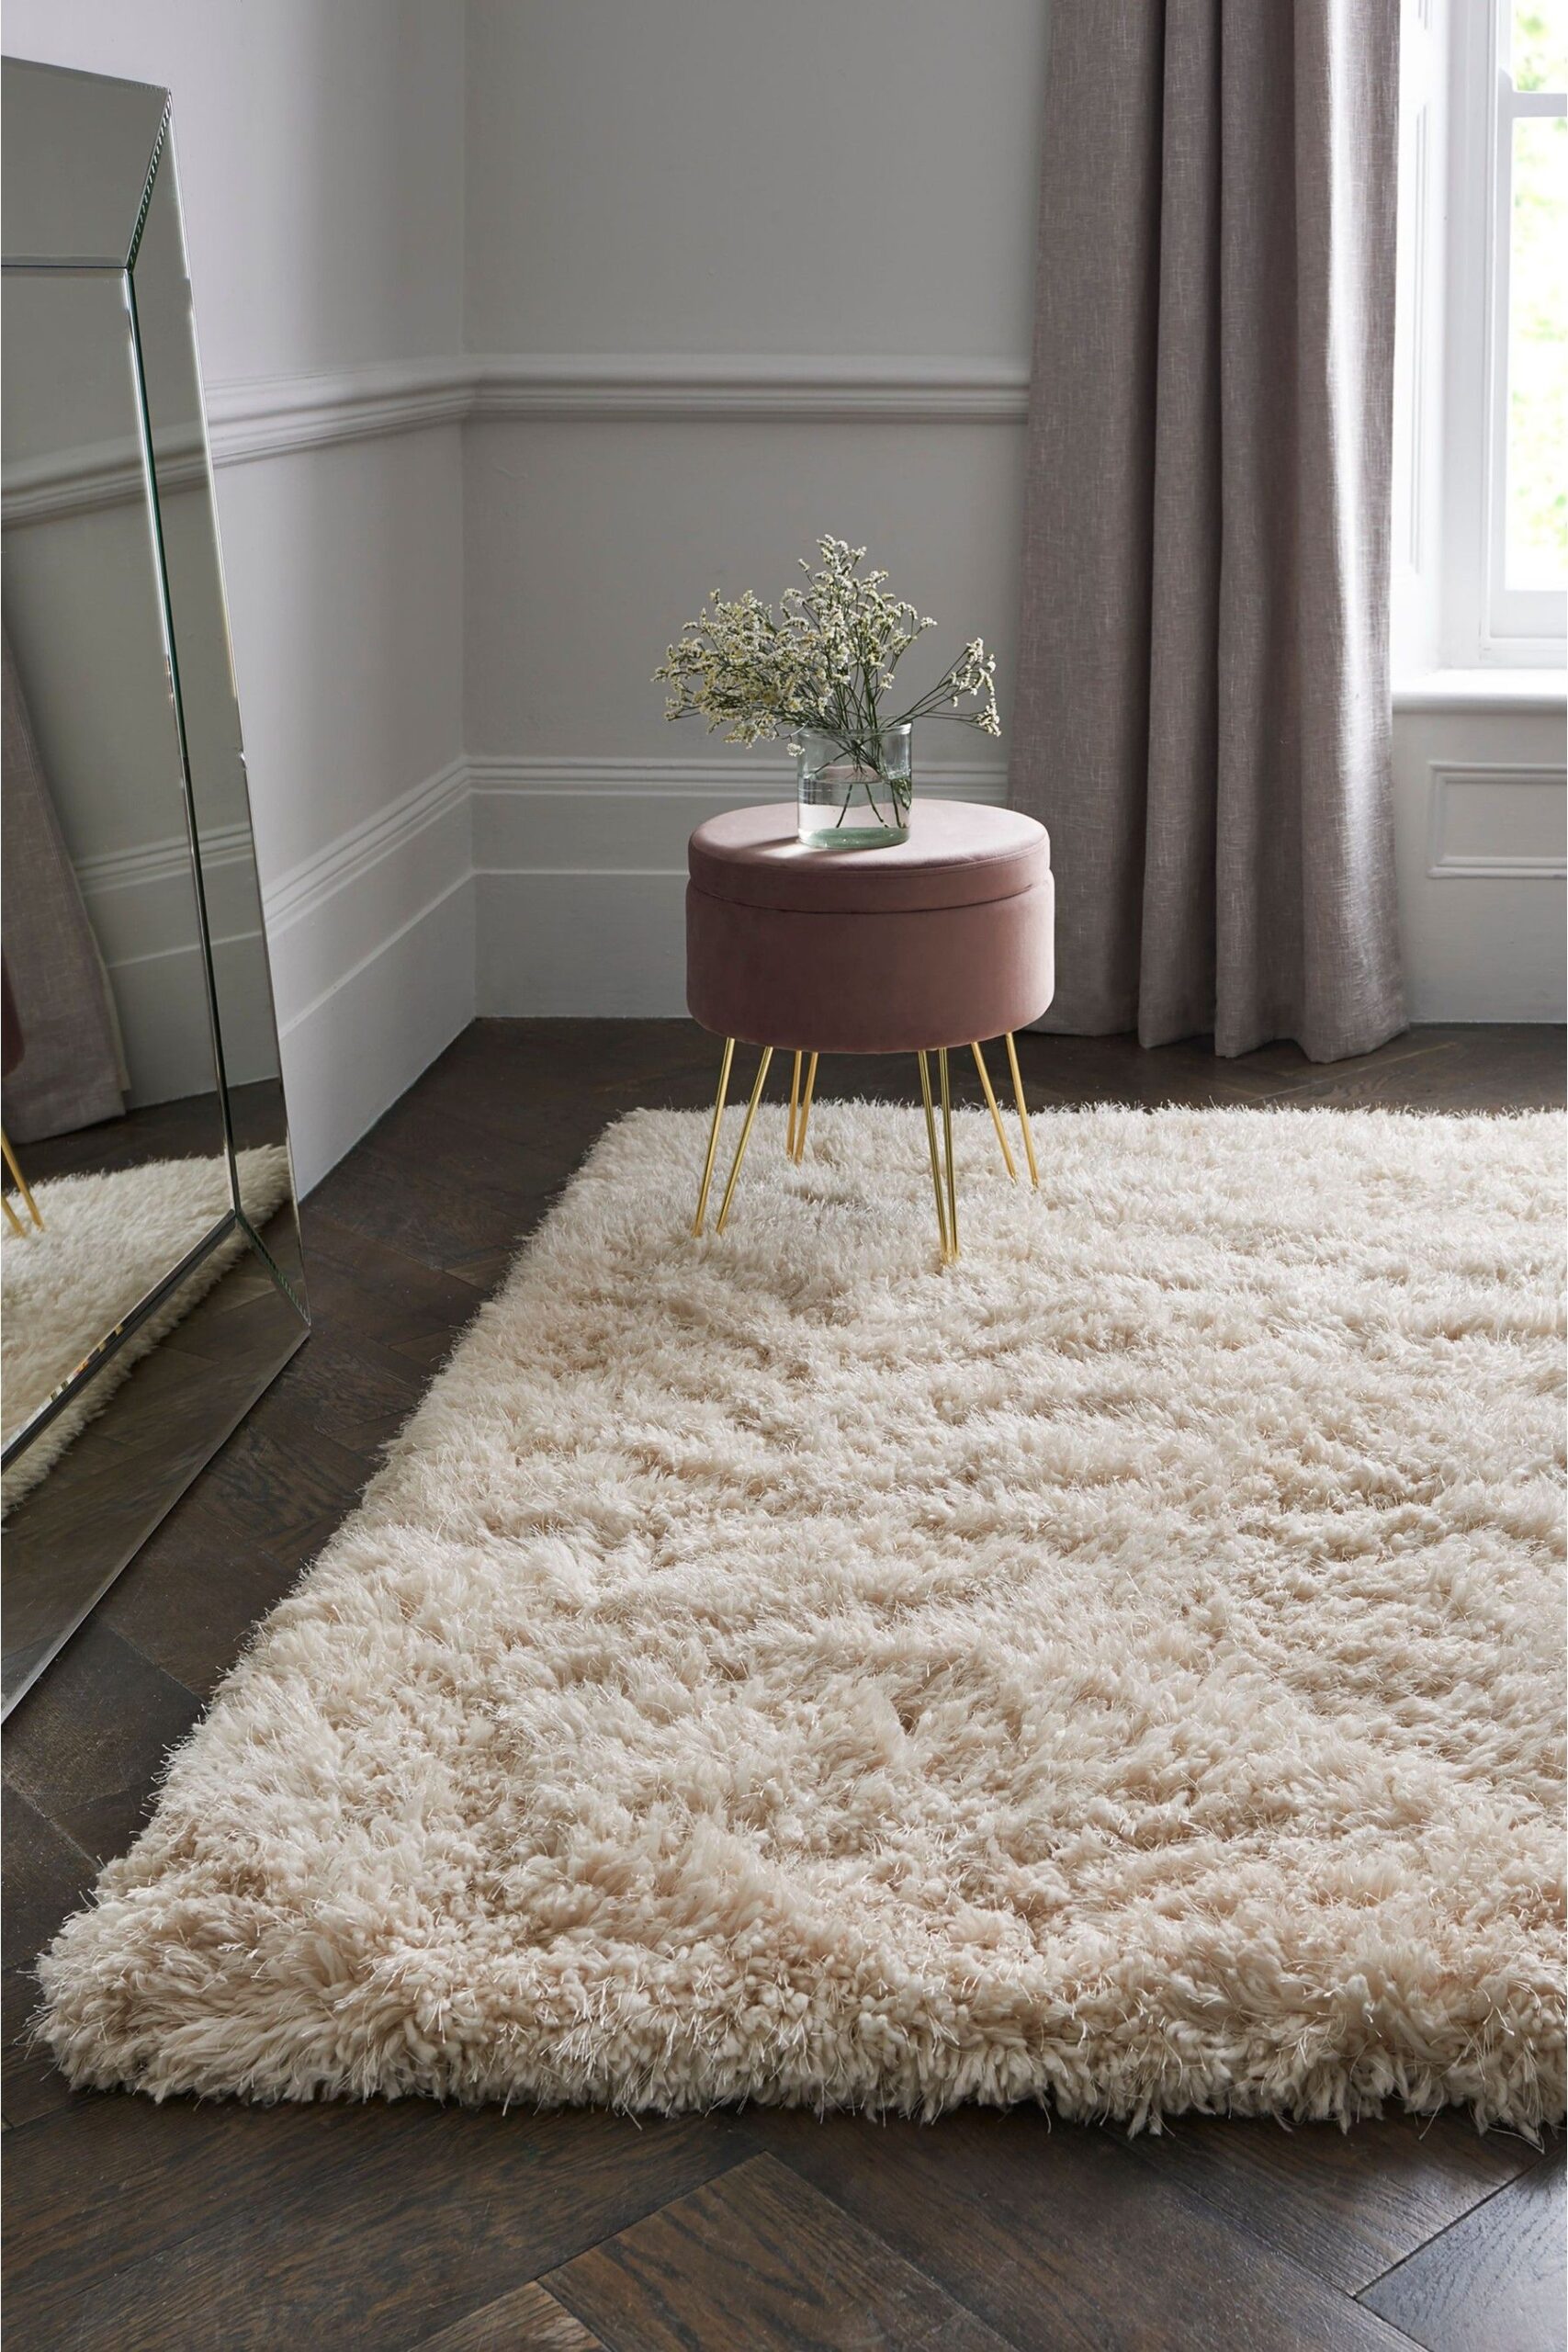 Inspiring ideas for decorating your room
  with carpets and rugs